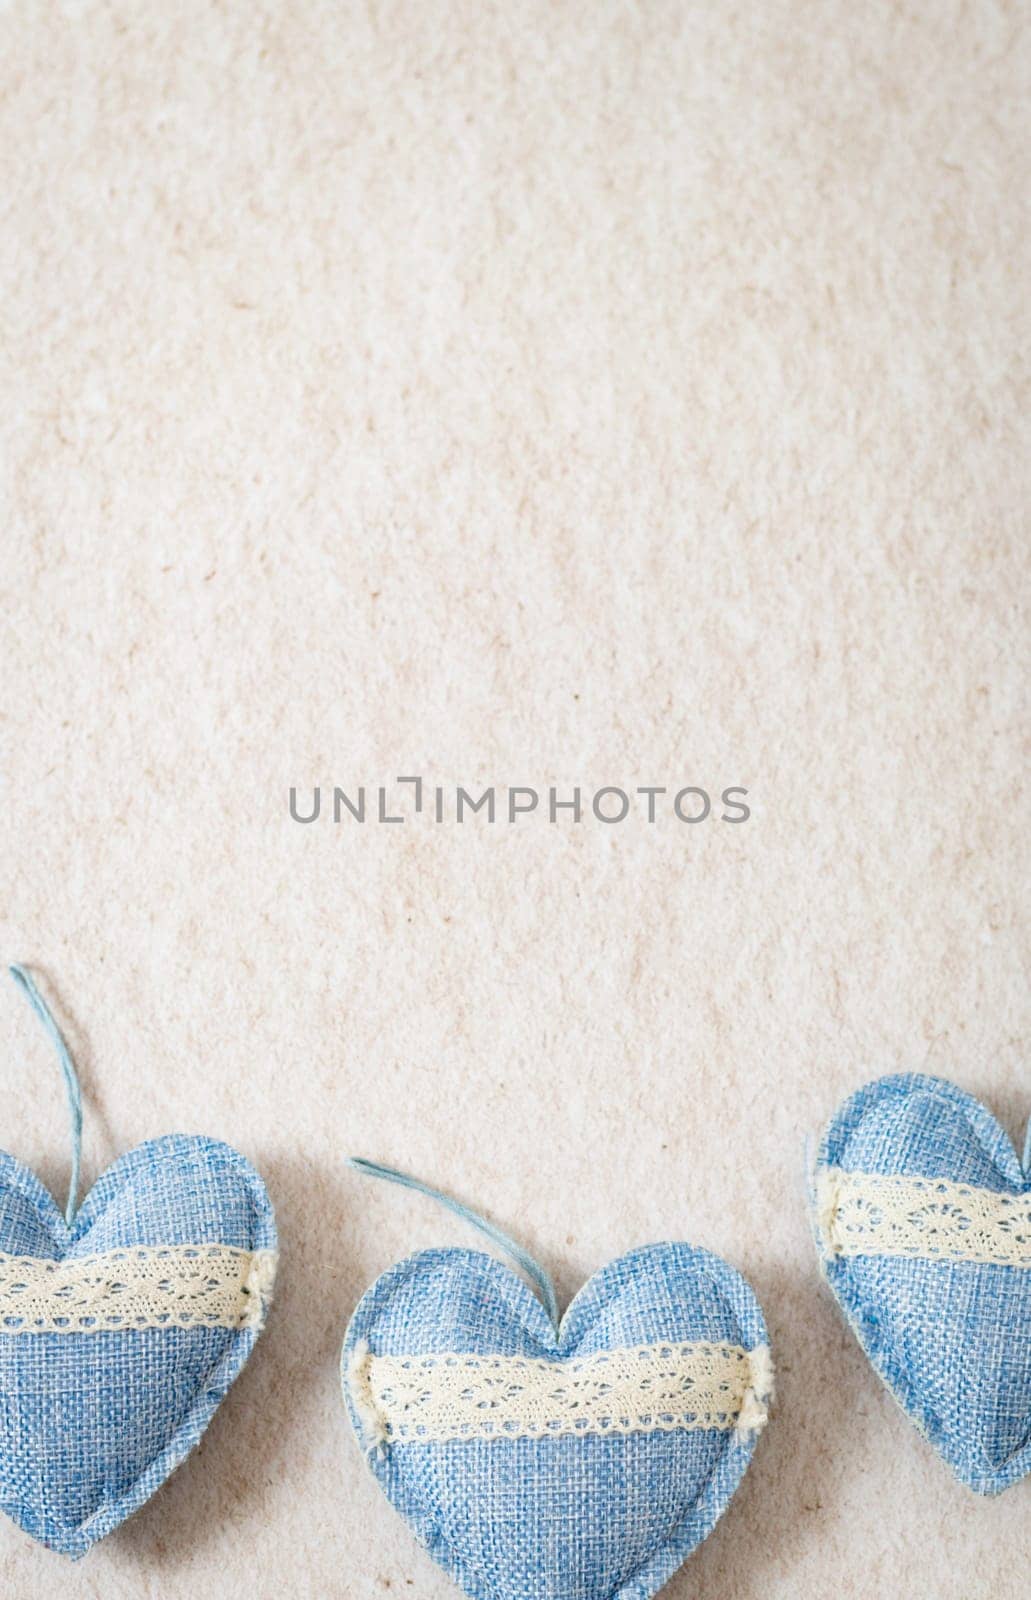 Three blue textile hearts with openwork stripes lie from below on a beige stone background with copy space on top, flat lay close-up. The concept of valentine's day, love day.